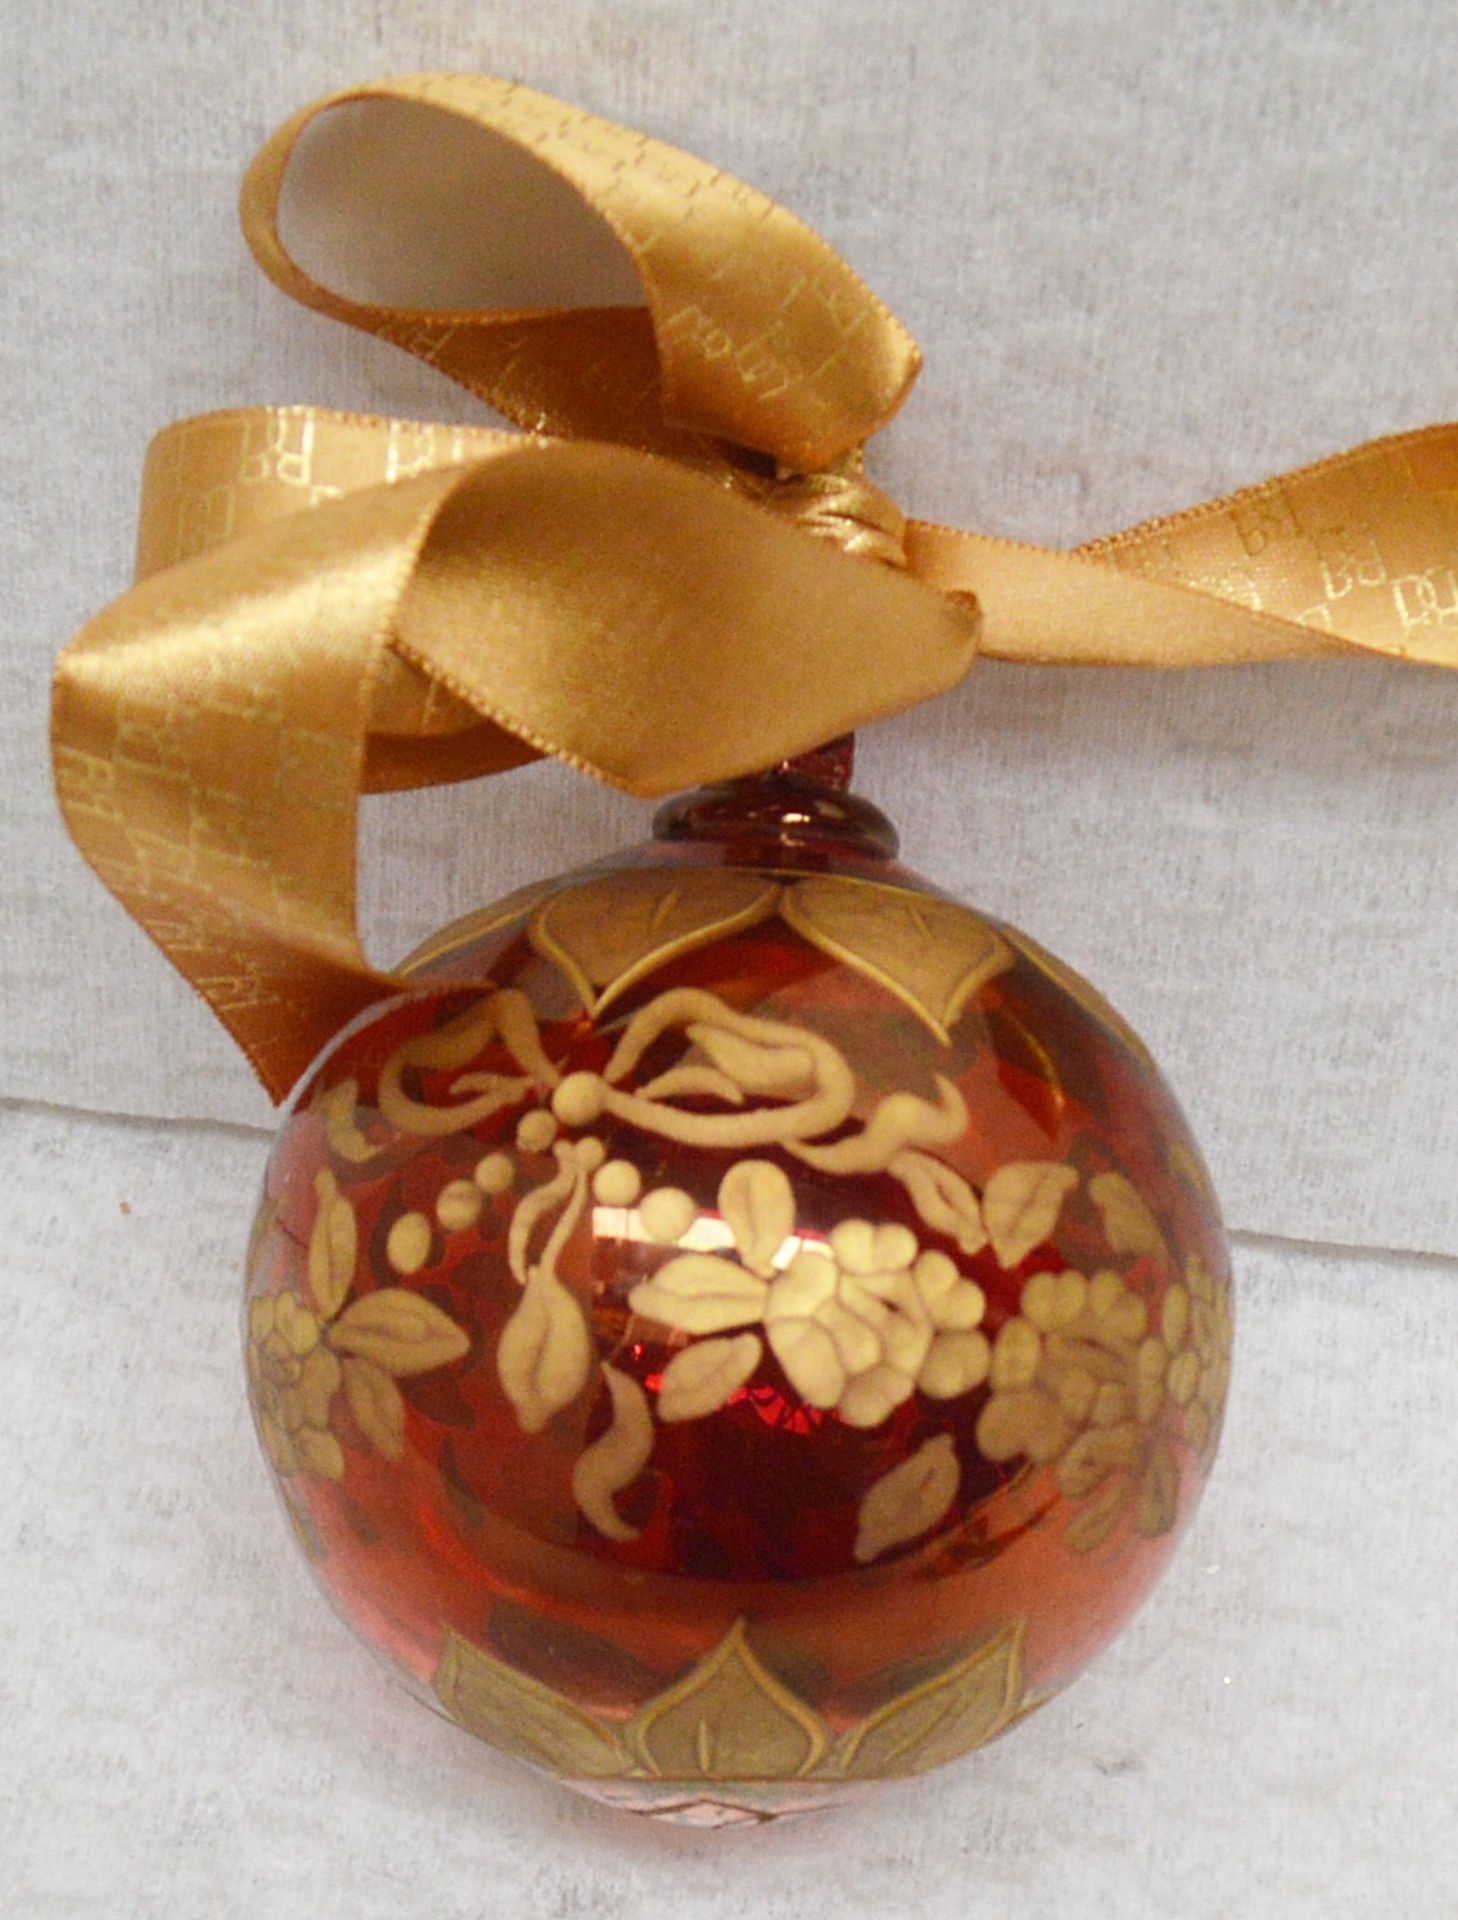 1 x BALDI 'Home Jewels' Italian Hand-crafted Artisan Glass Christmas Tree Decoration In Red and Gold - Image 2 of 4